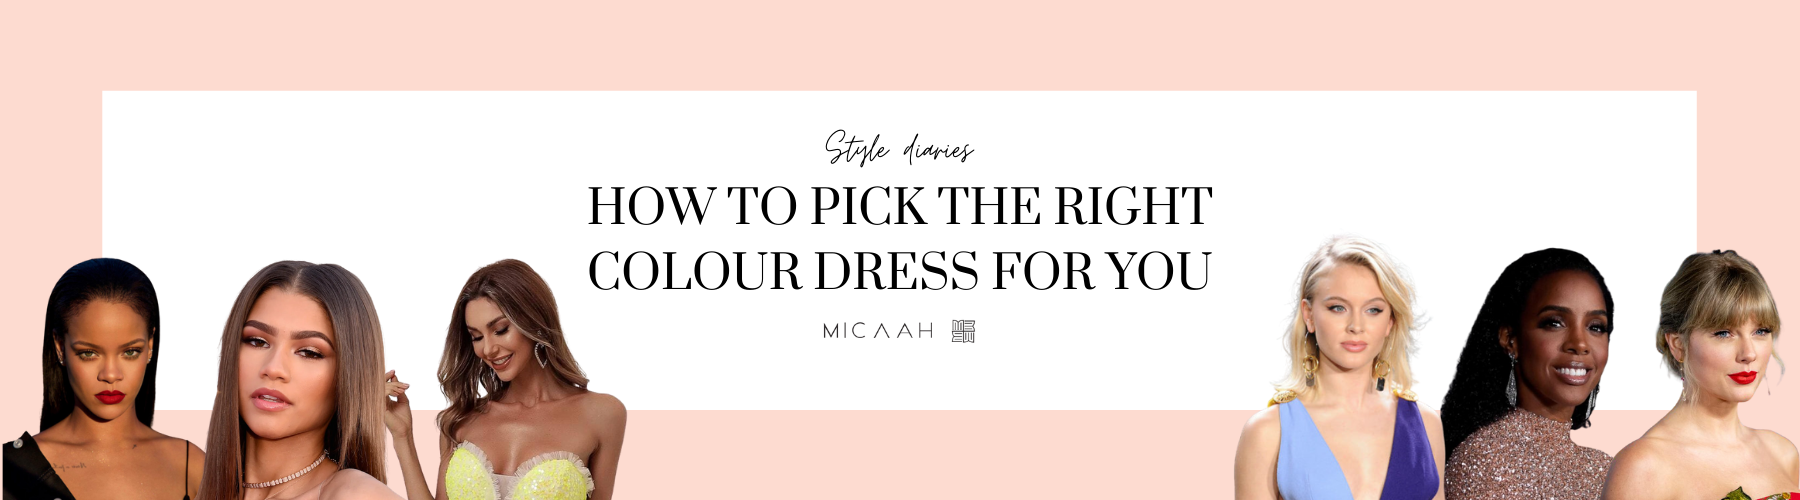 How to pick the right colour dress for you - Formal Dress color Prom Dress